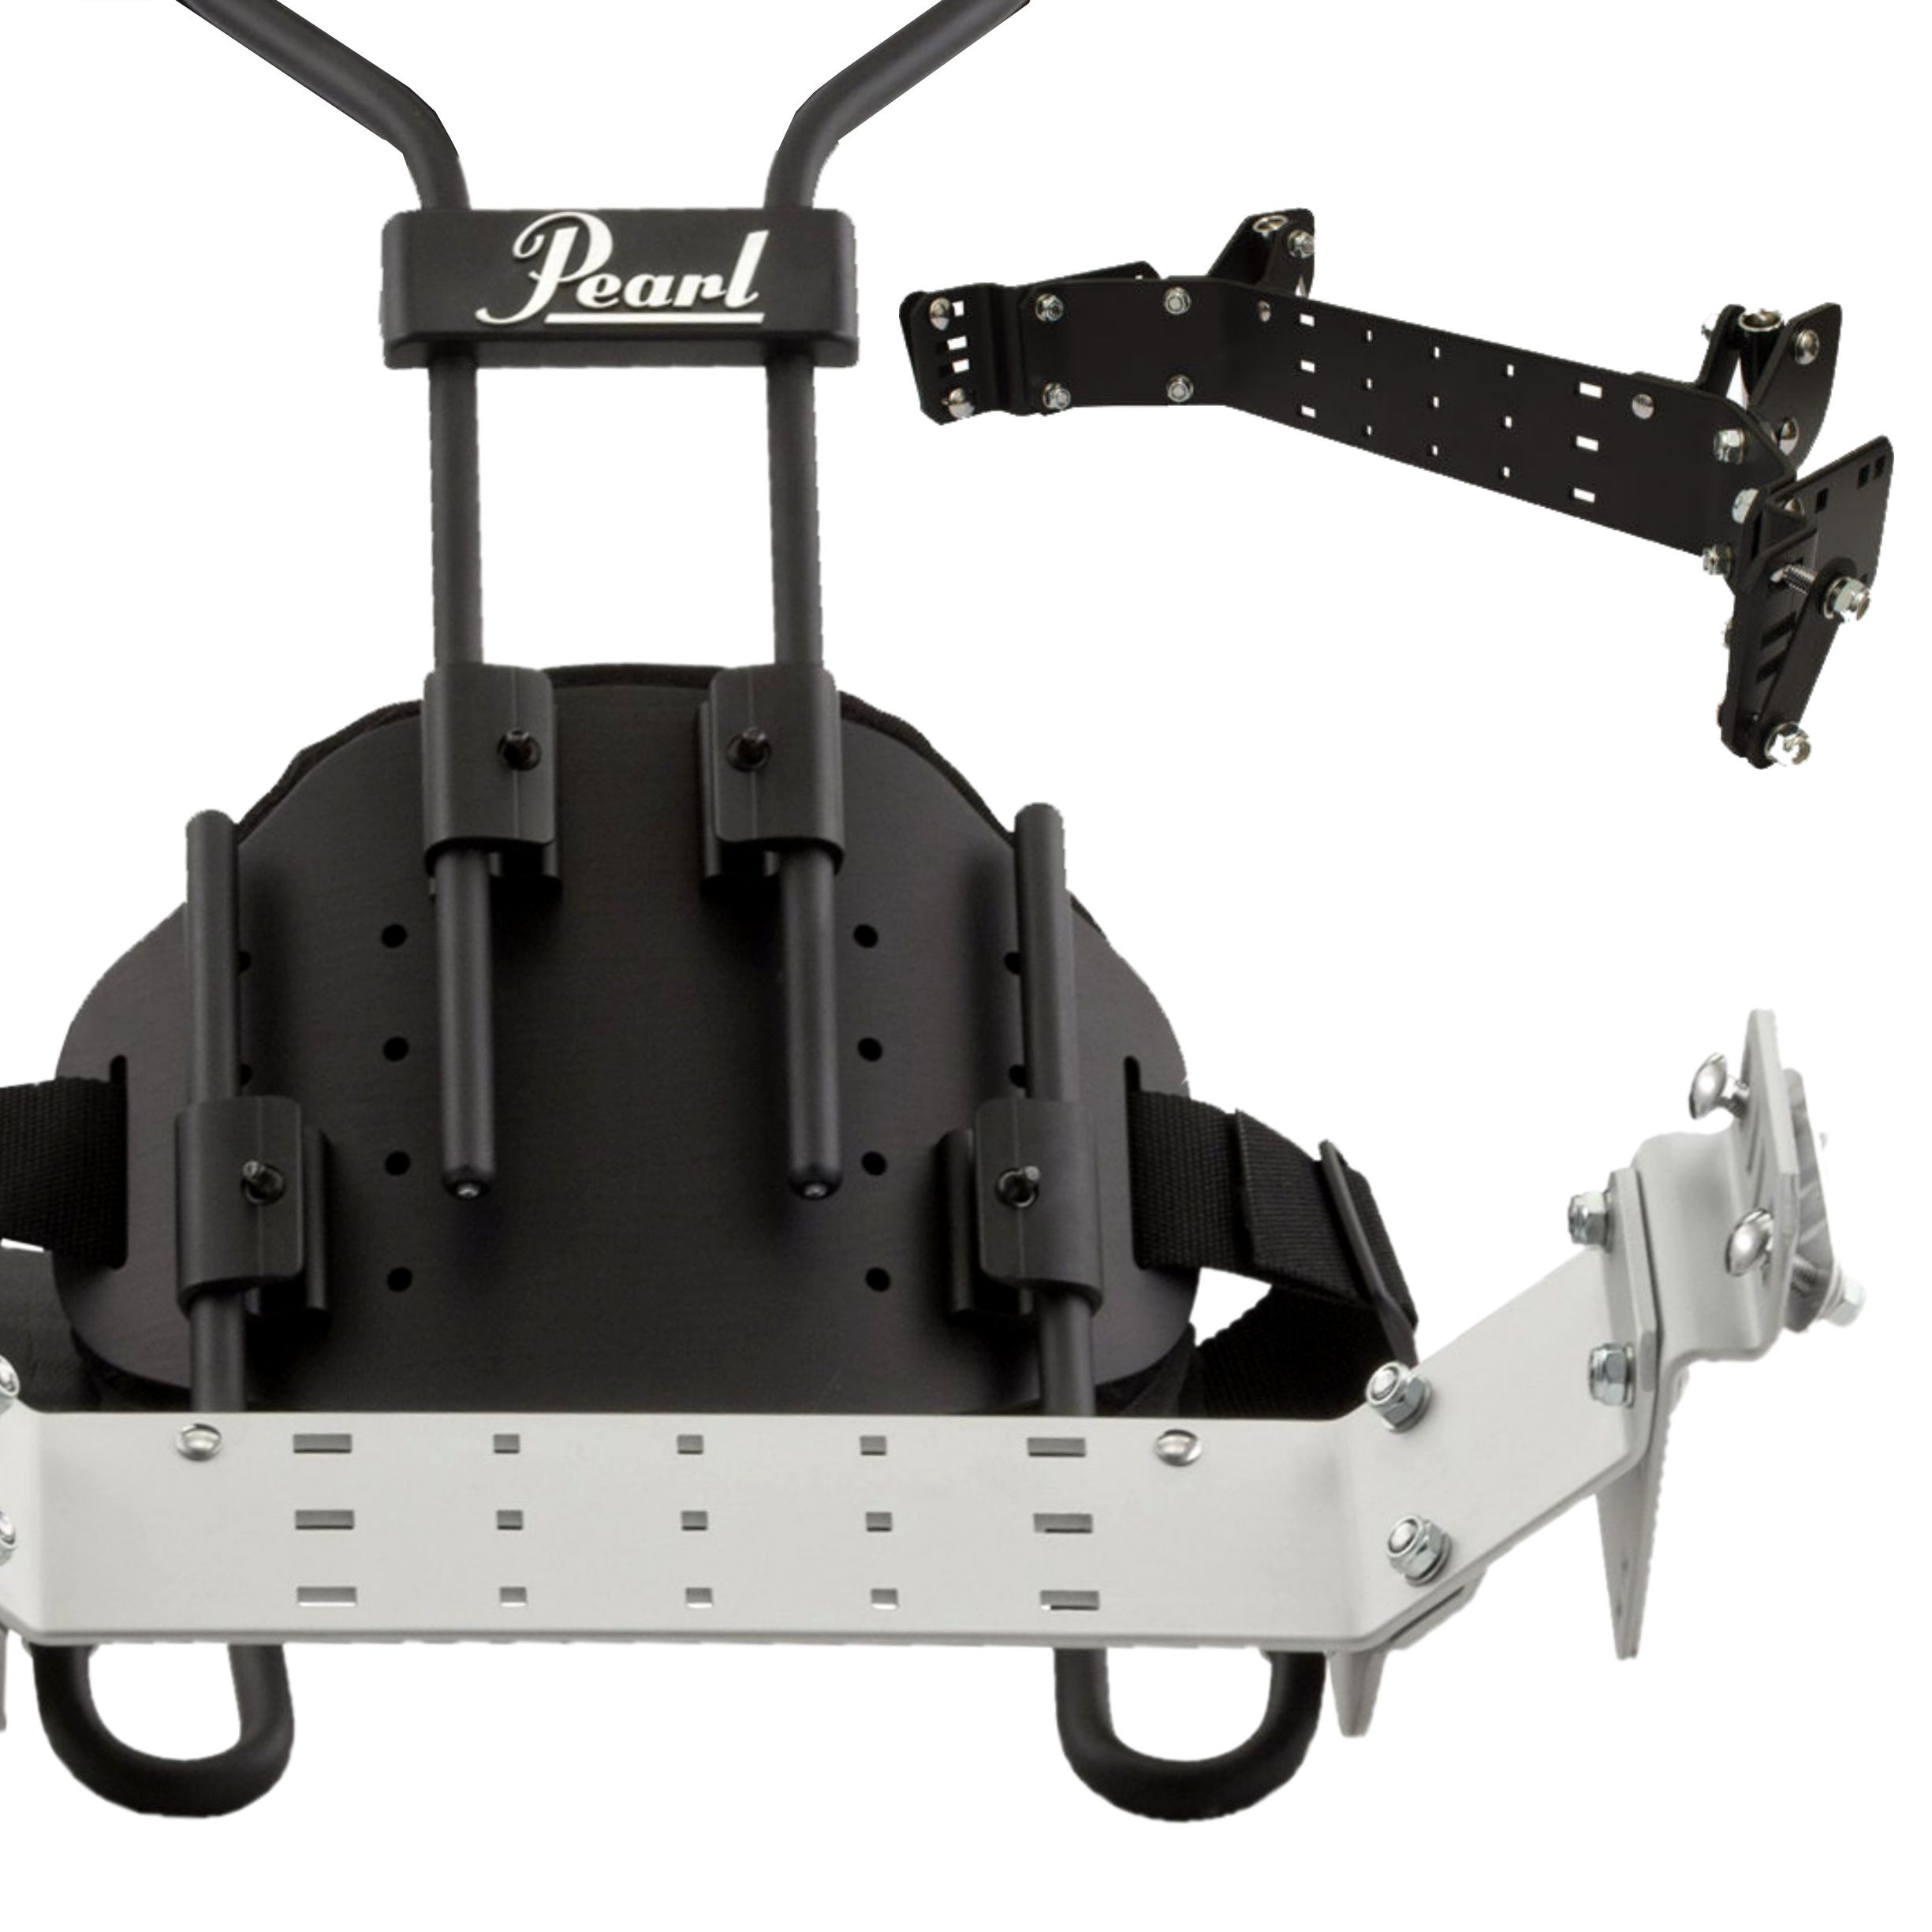 Pearl CXT-1 Air Frame Marching Multi Tenor Drum Carrier (Including Tenor Back Bar)